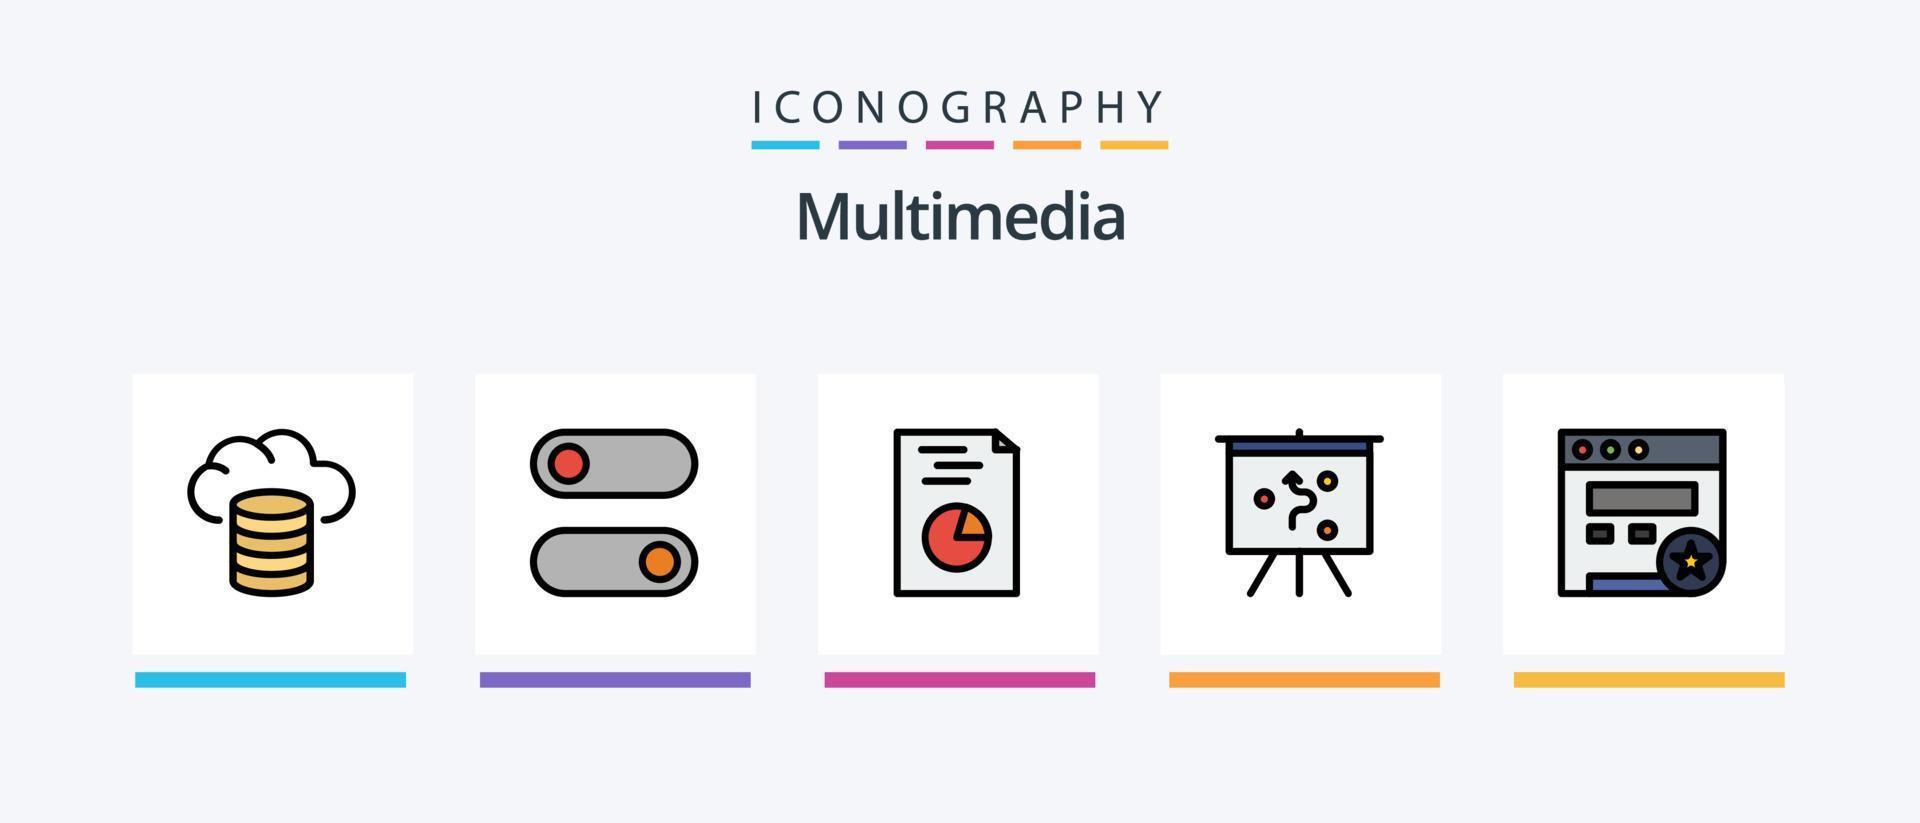 Multimedia Line Filled 5 Icon Pack Including . search. sync. backup. Creative Icons Design vector